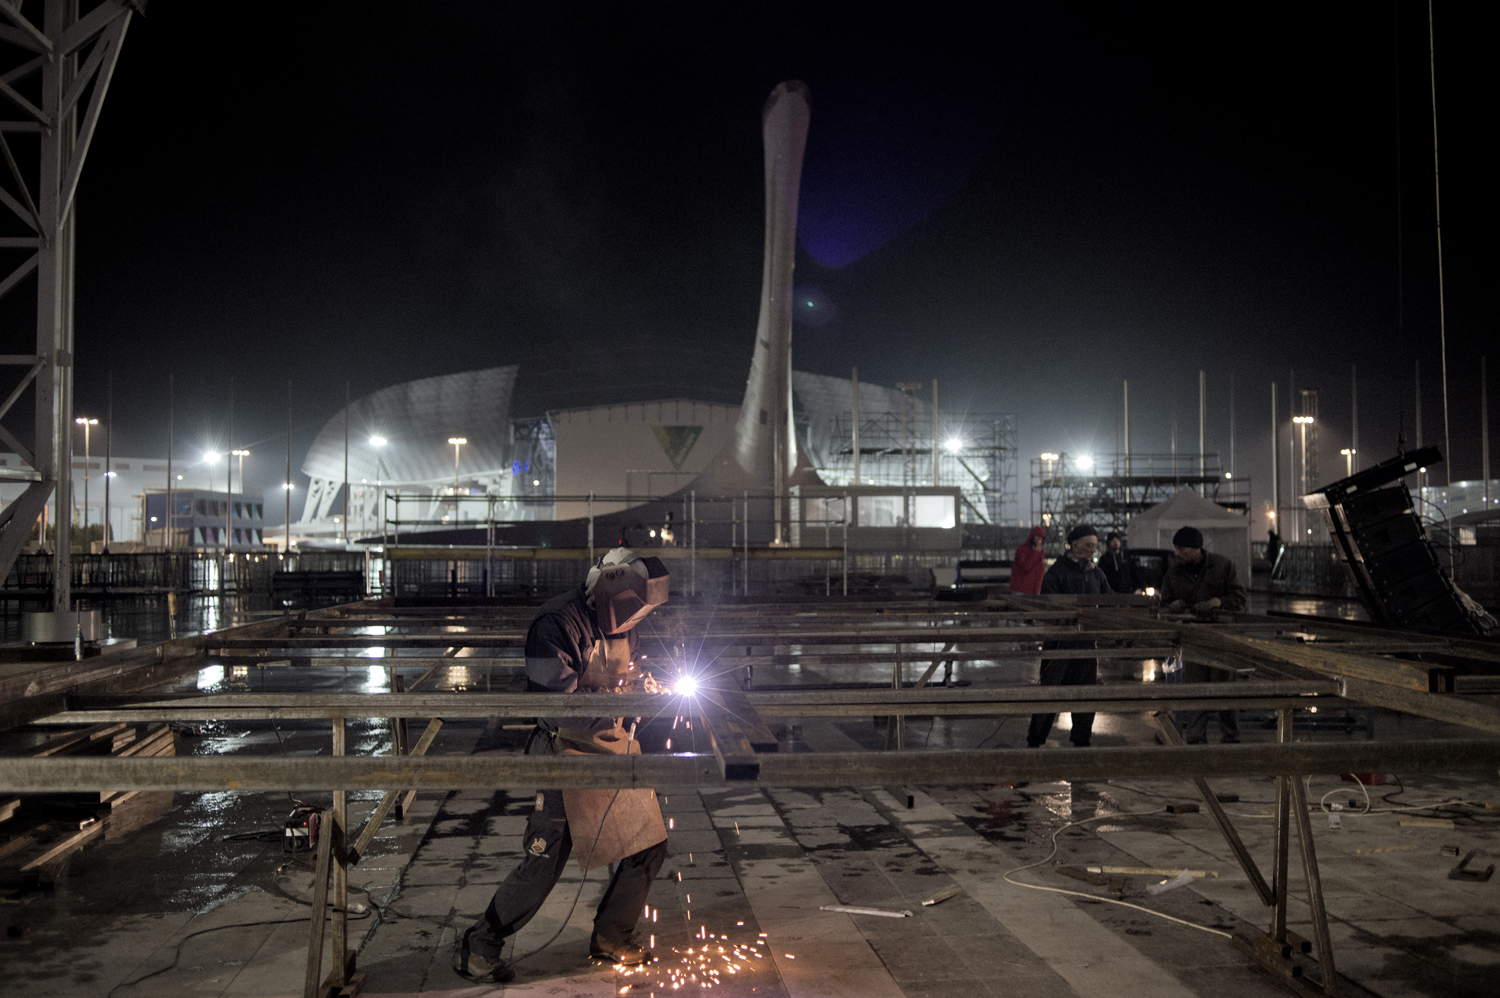 Sochi Russia January 17 2014A welder assembles the frame for the winners' podium of the Winter Olympic Games to be held in Sochi. In the background hovers the massive Olympic torch, which will be lit during the opening ceremony for the Sochi Games on Feb. 7.